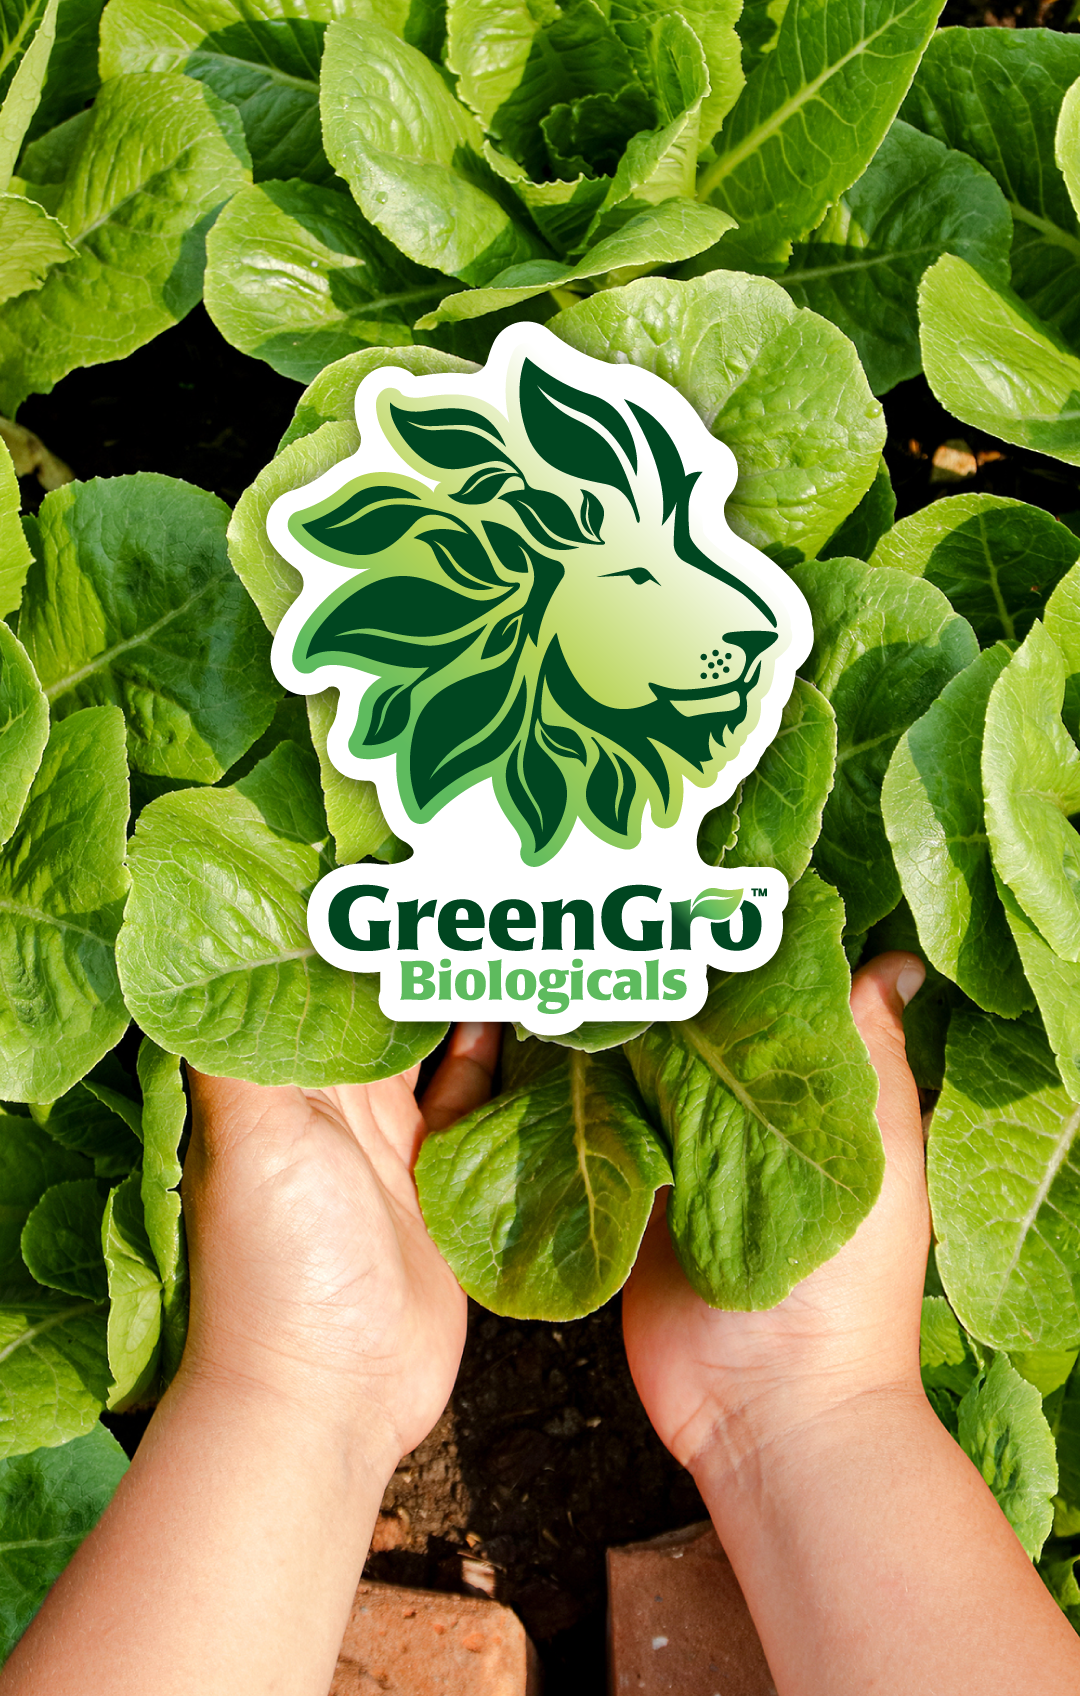 Green Gro Logo overlayed on Woman holding Lettuce head in garden bed